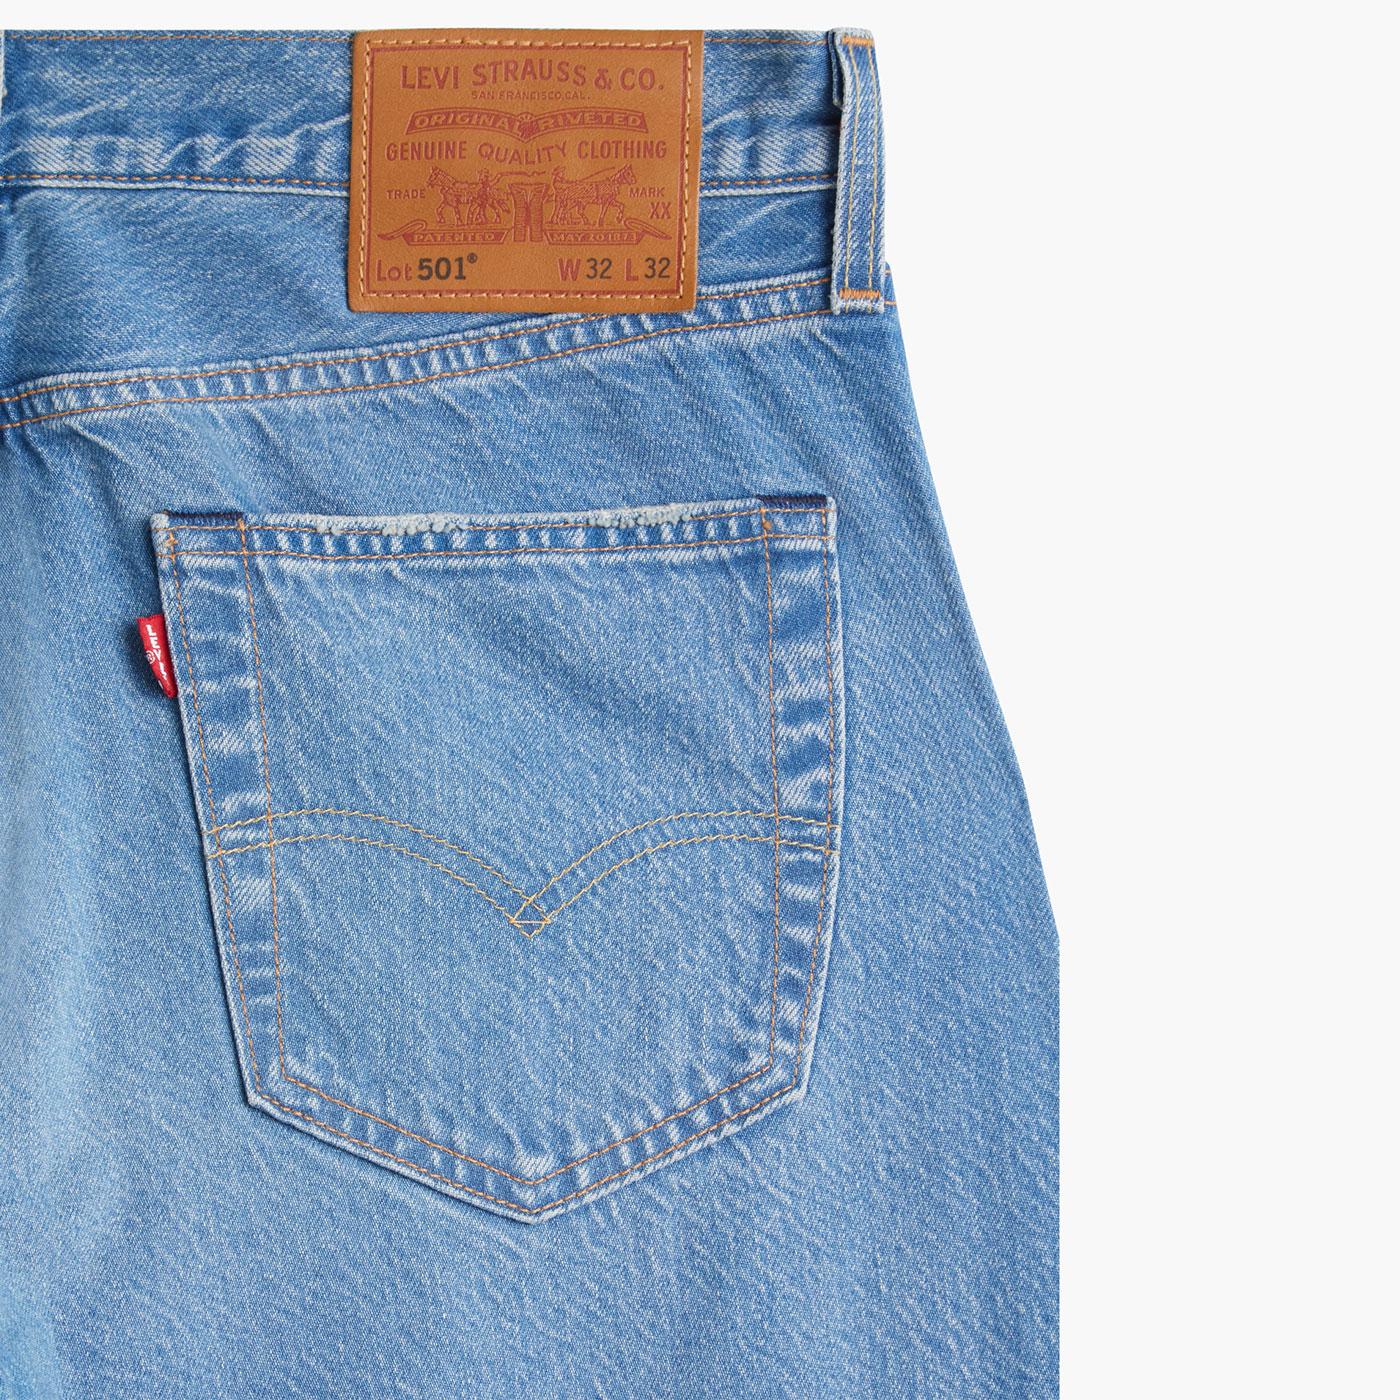 LEVI'S 501 Original Straight Retro Jeans in Canyon Shadows